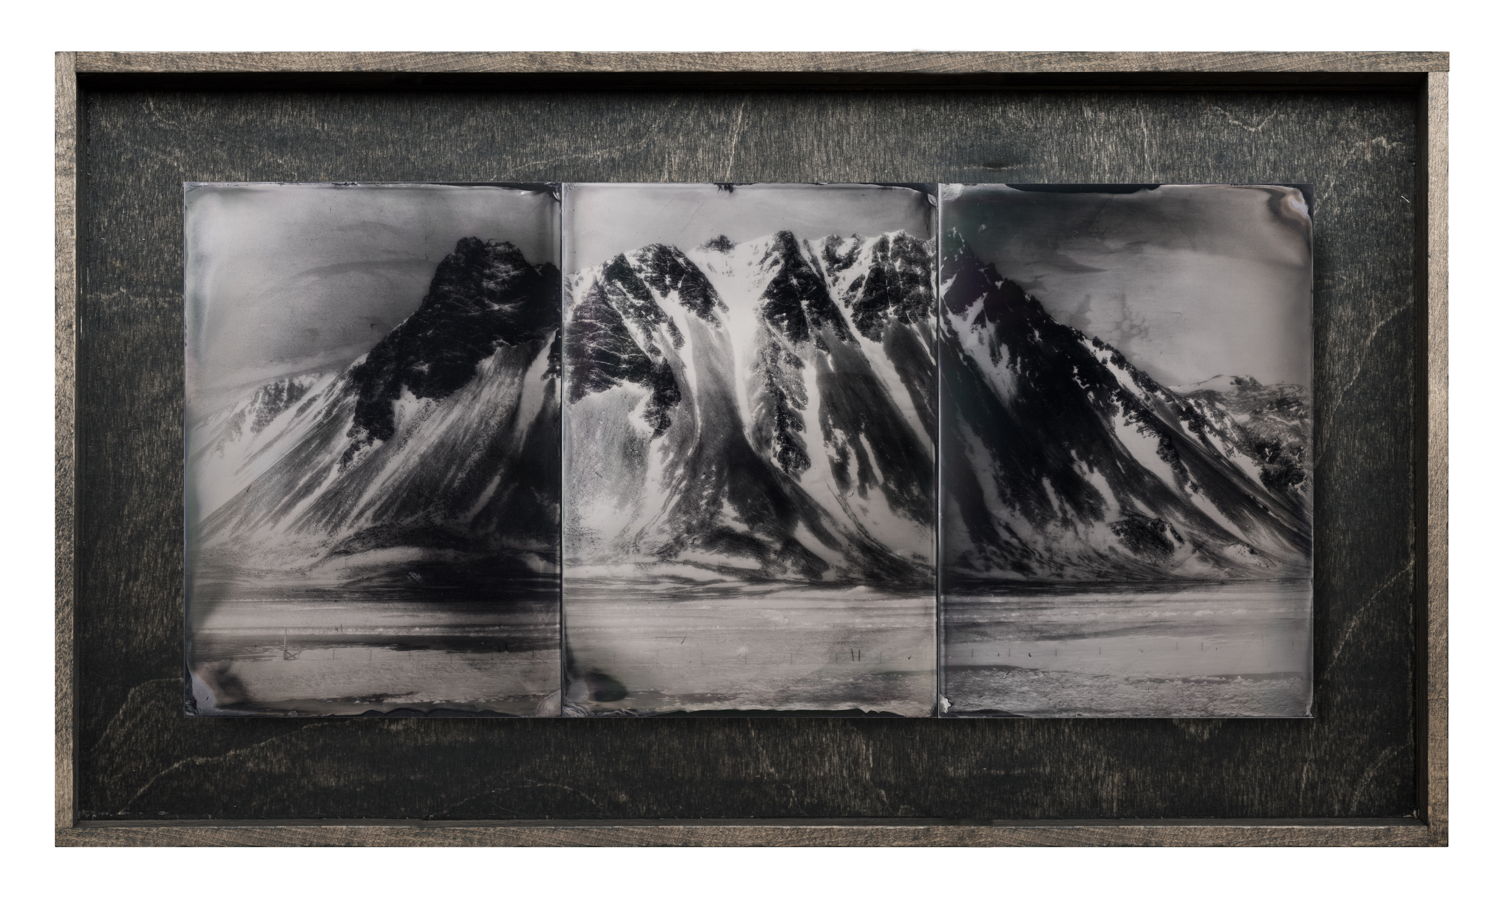 Jörg Bräuer_The Dissolution of Time 2 – Snaefellsnes_2021_handmade, triptych on wet plate collodions – ferrotypes_40 x 70 cm_unique piece_©Courtesy of the artist & Spazio Nobile.